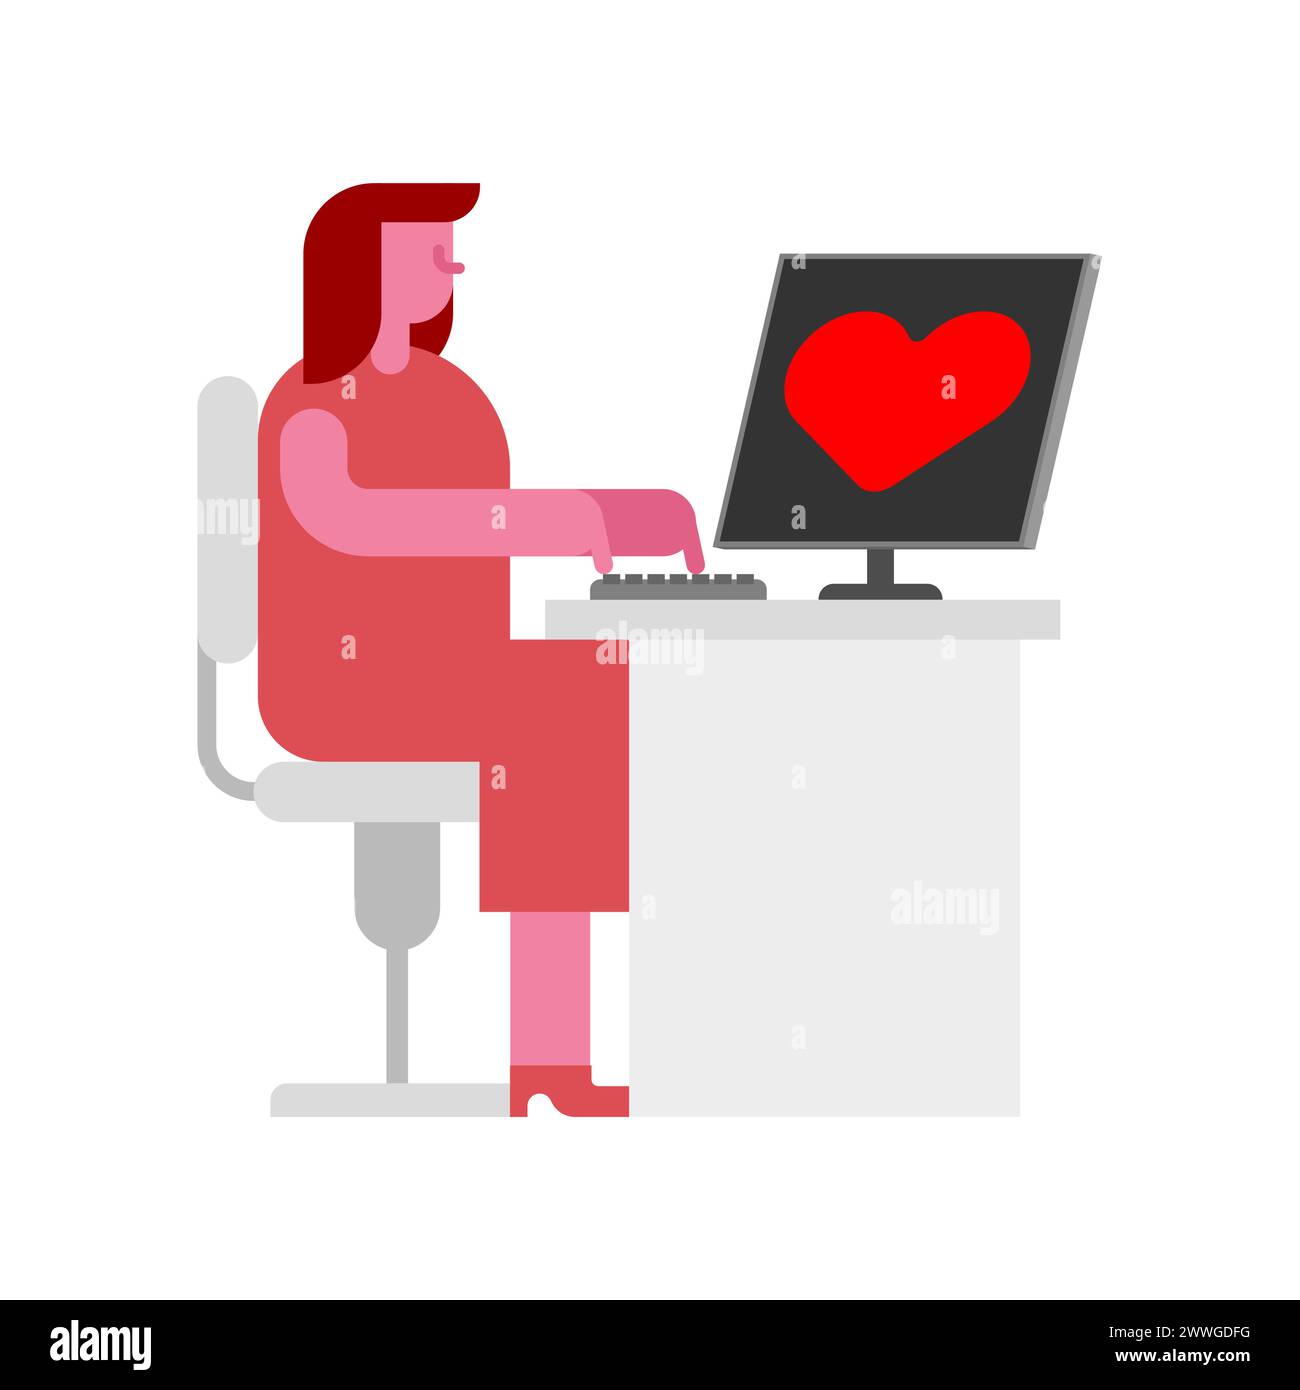 Online love. Virtual love relationships. Love correspondence on Internet. Girl at computer writes to her lover. Online dating. Stock Vector